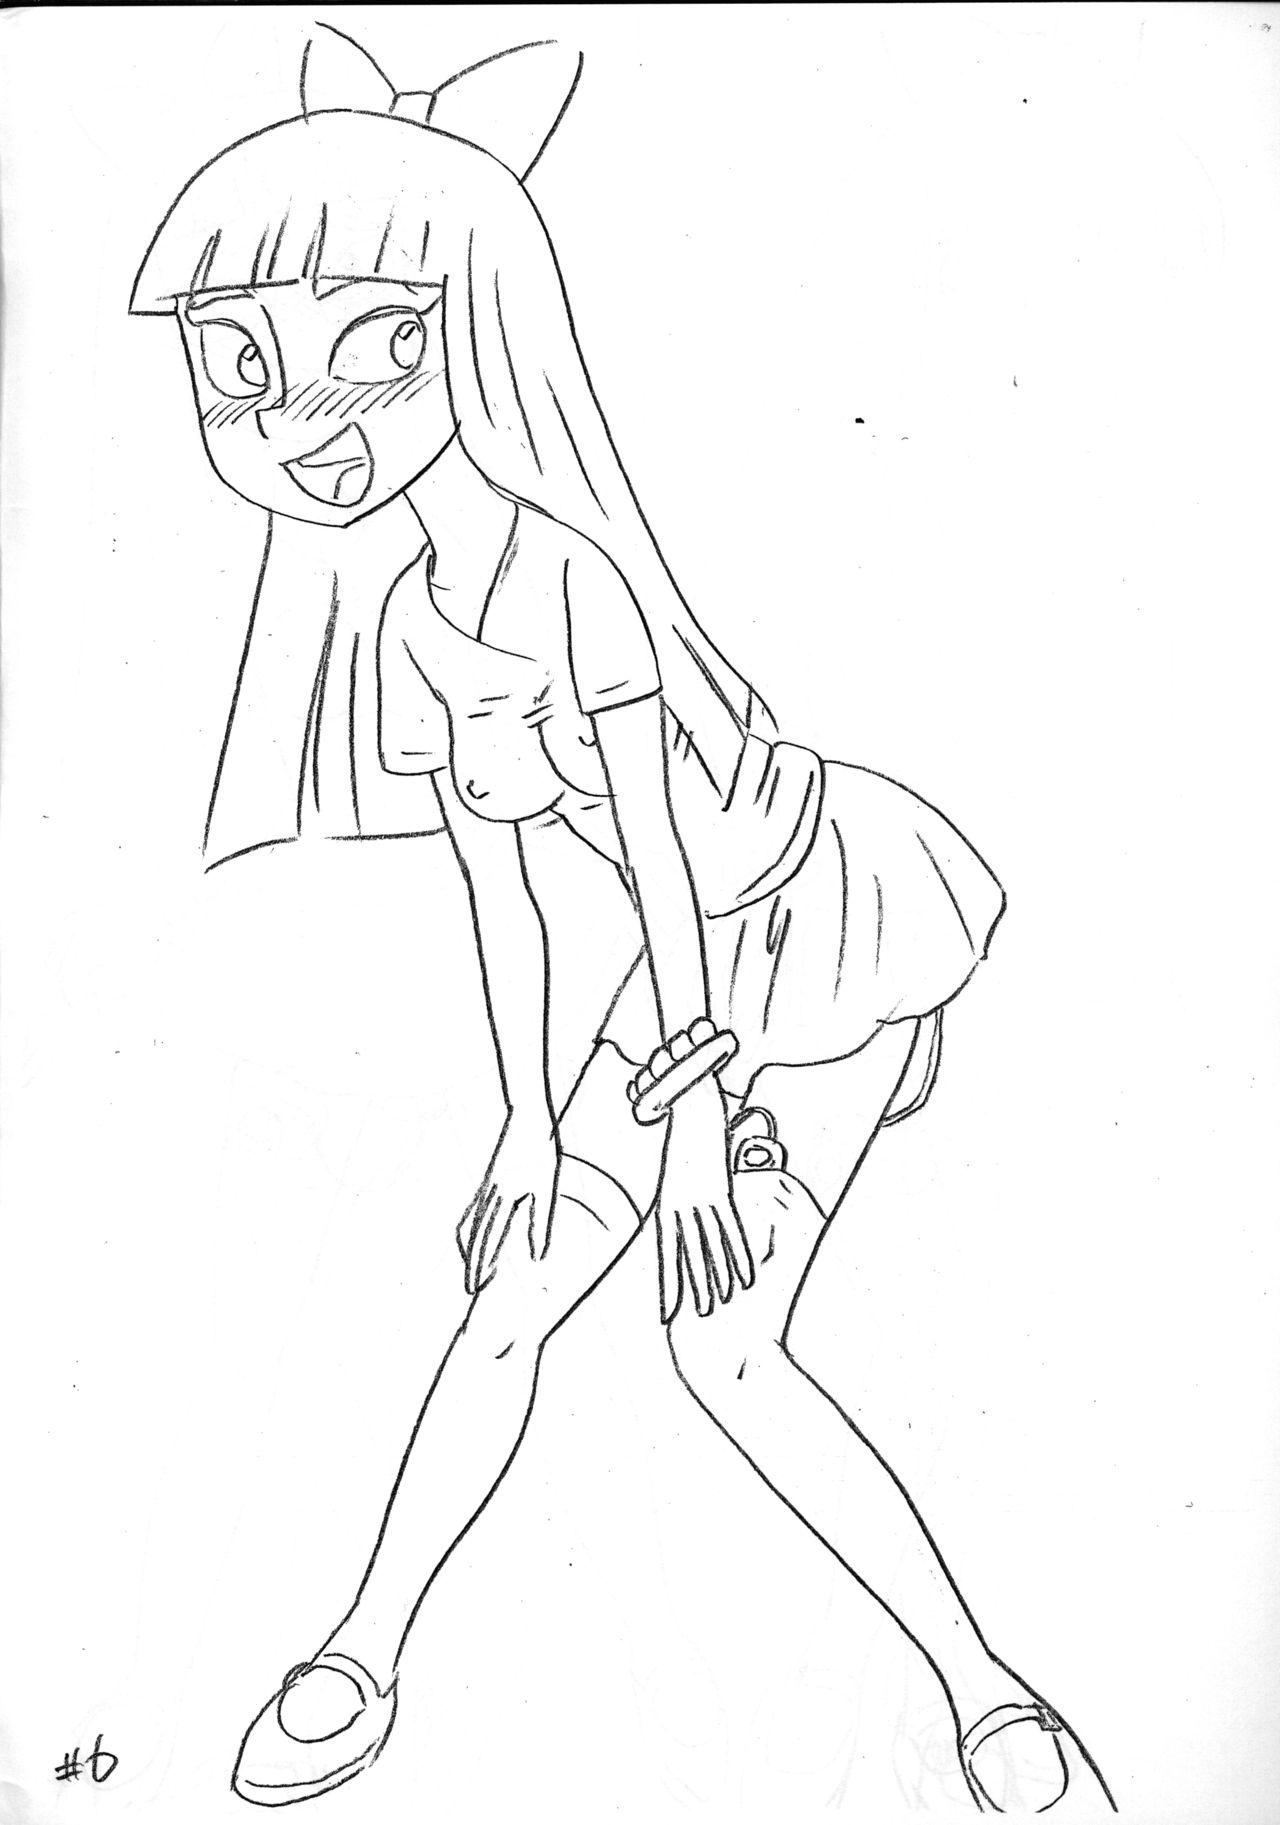 Gay Bukkake Psychosomatic Counterfeit Ex: Stacy in A.S. - Phineas and ferb Thief - Page 5